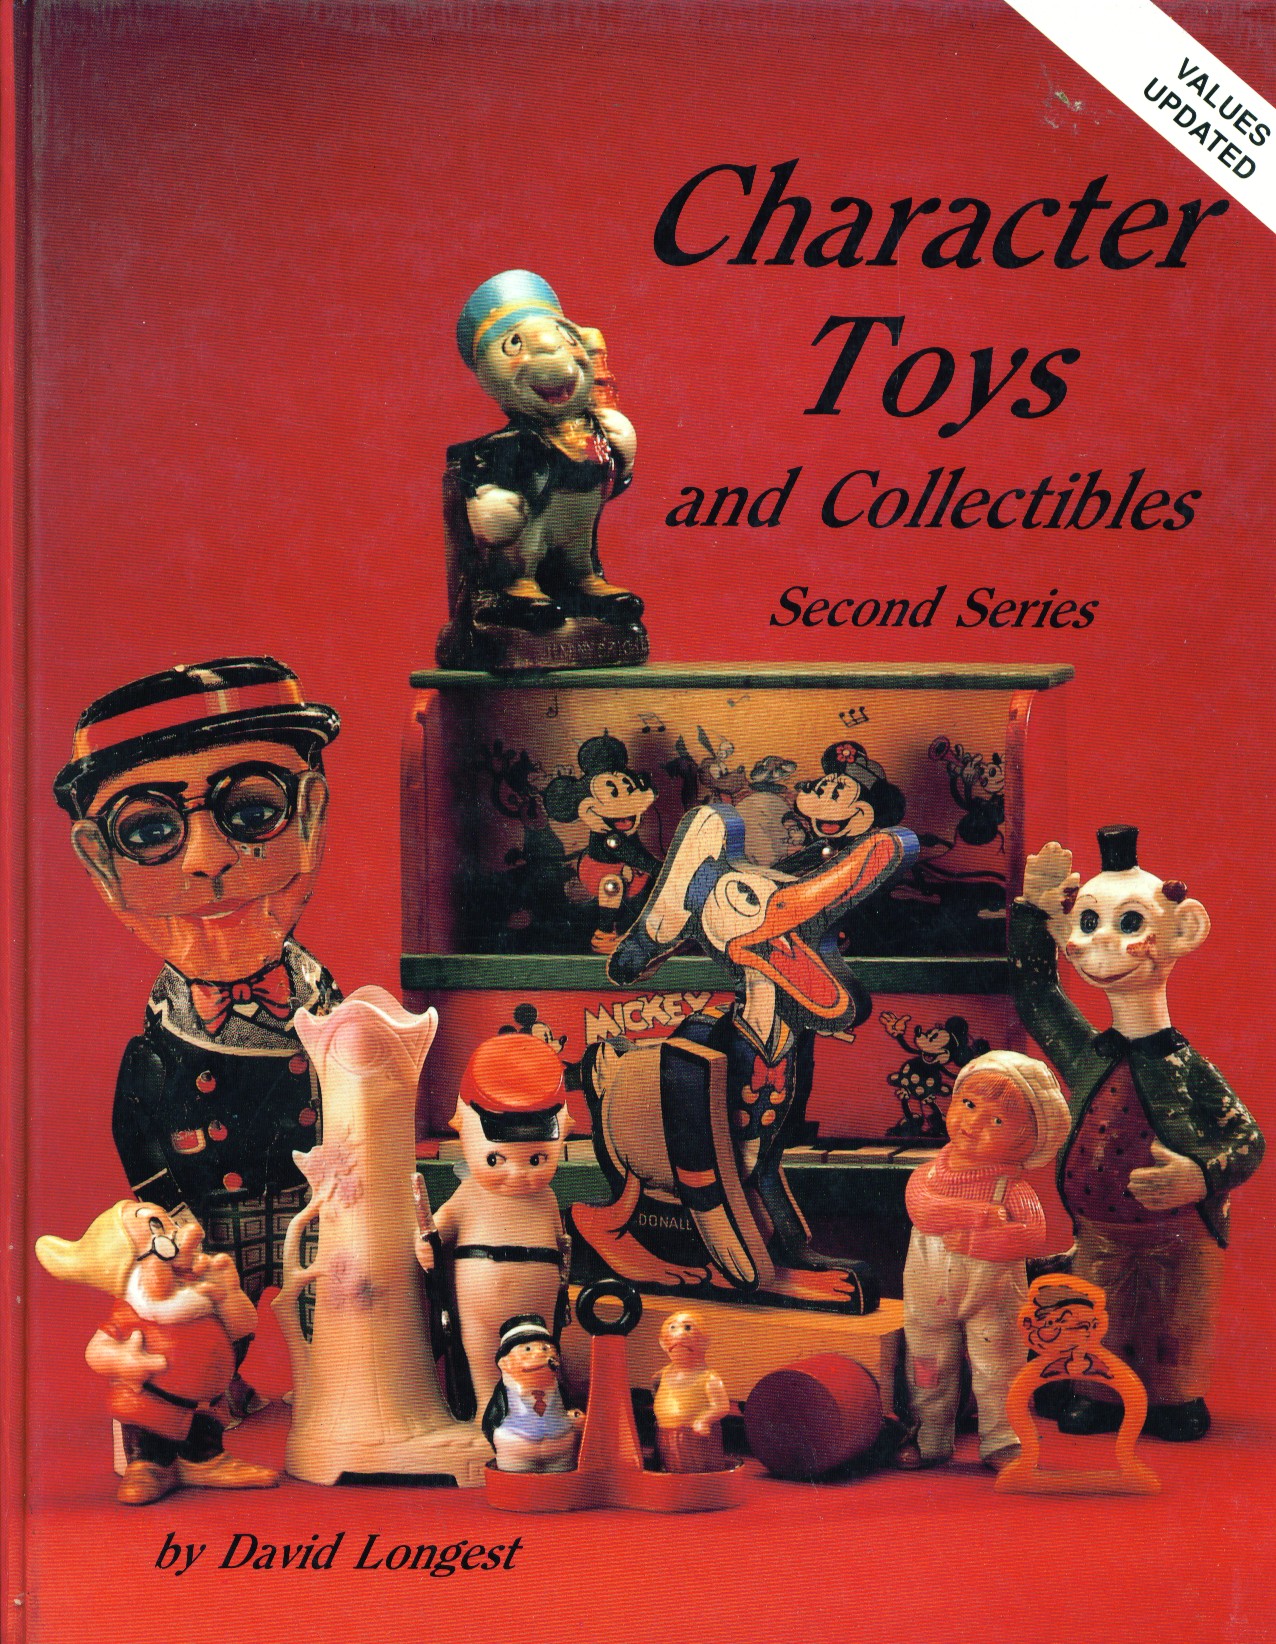 Character toys